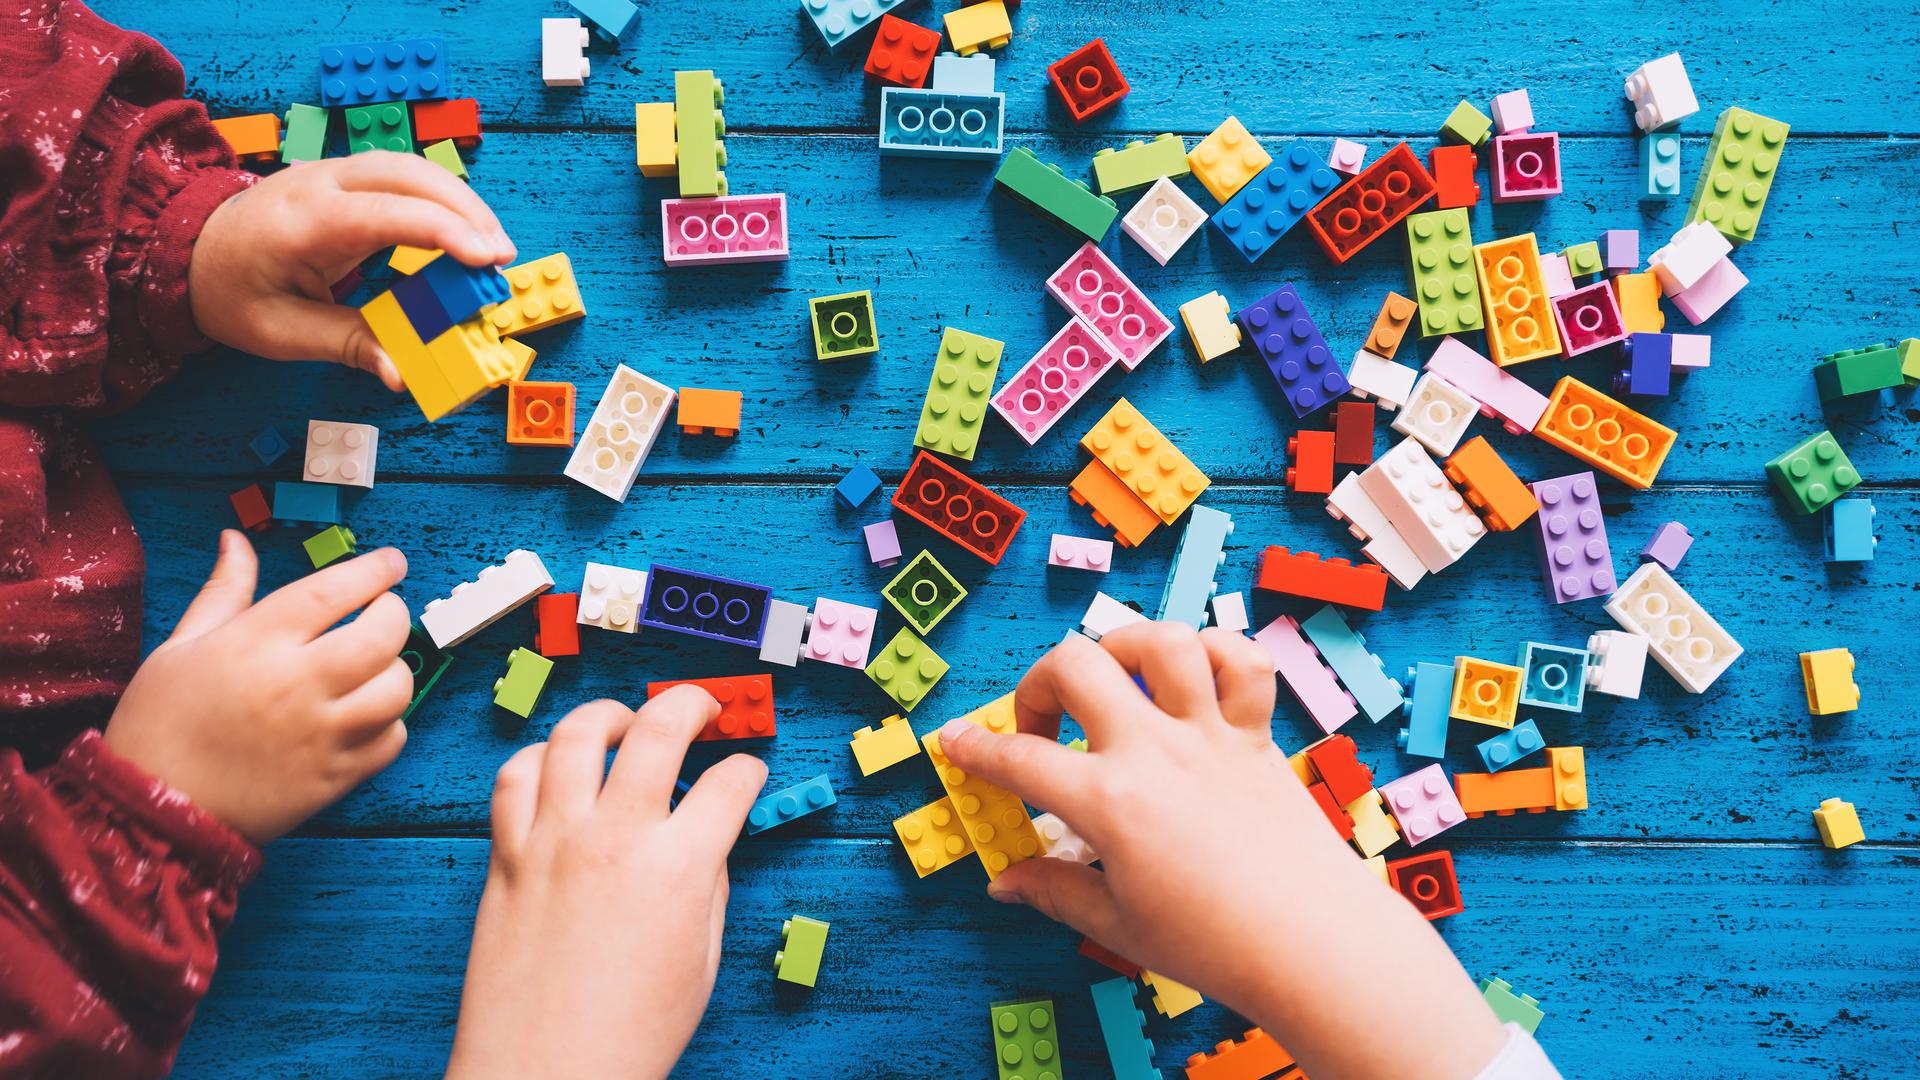 Children play and build with colorful toy bricks or plastic blocks on table. School or preschool background. Concept of kids leisure and education at home or class, early learning and development.